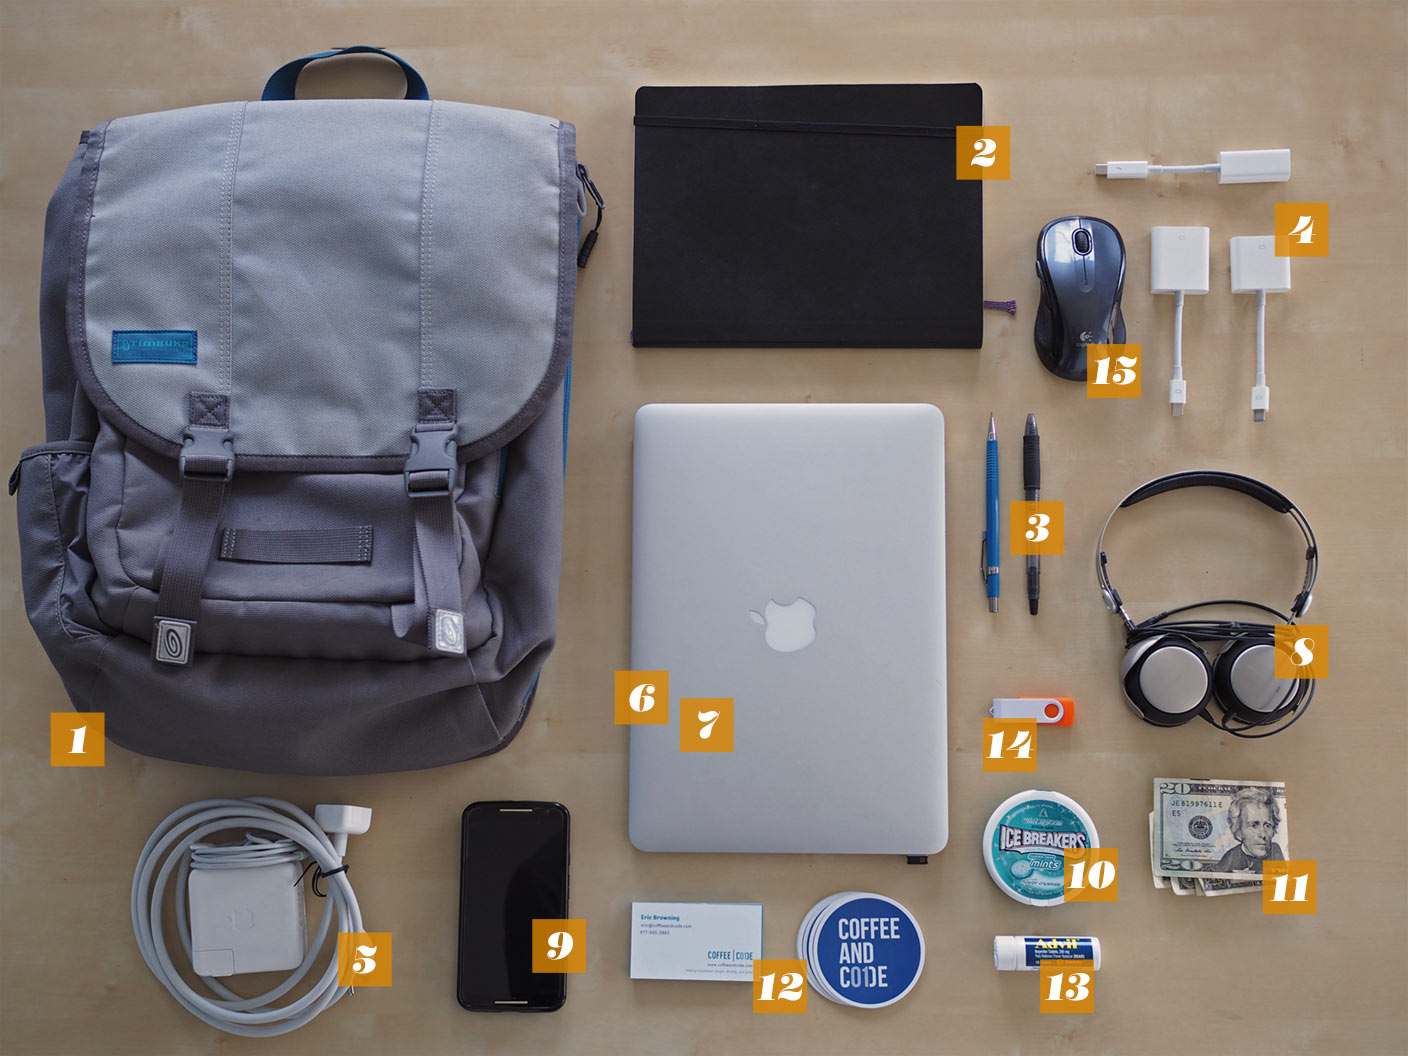 Things you might not think to bring with you, like adapters, cash, mints and swag.